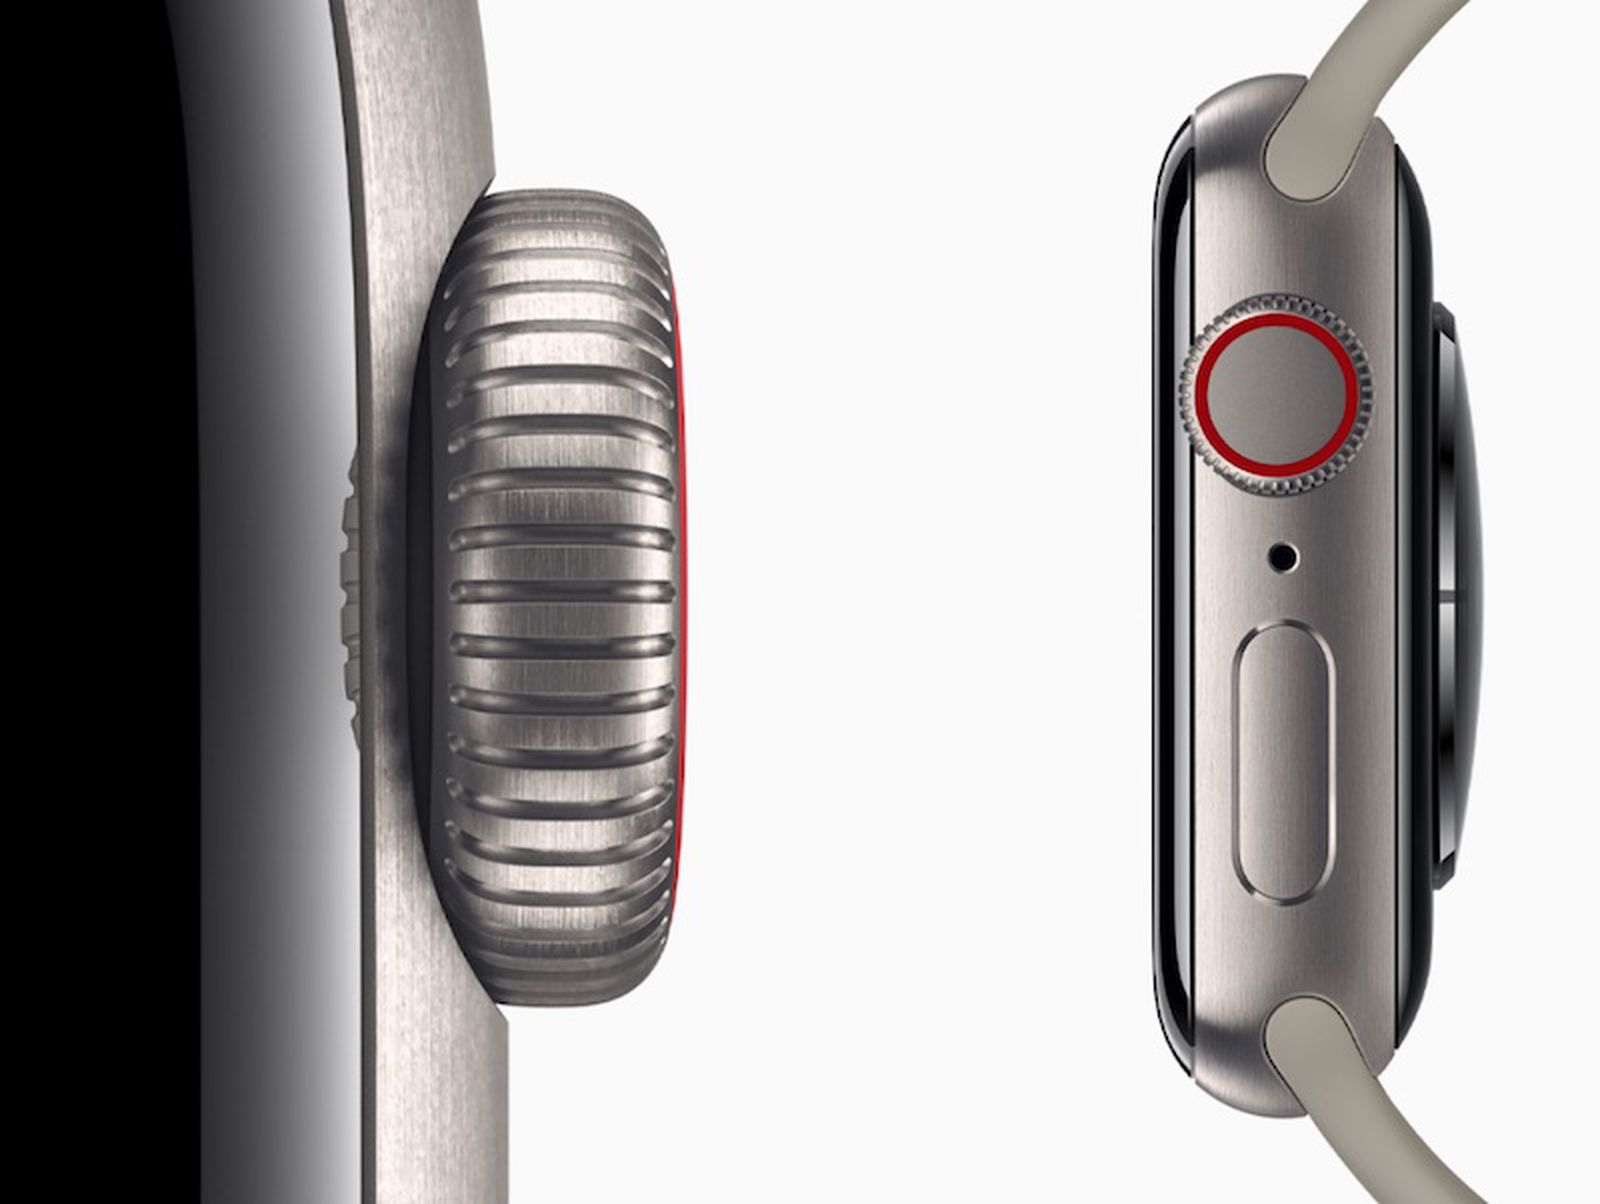 Apple Watch Series 5 Titanium Models Weigh Up to 13% Less Than